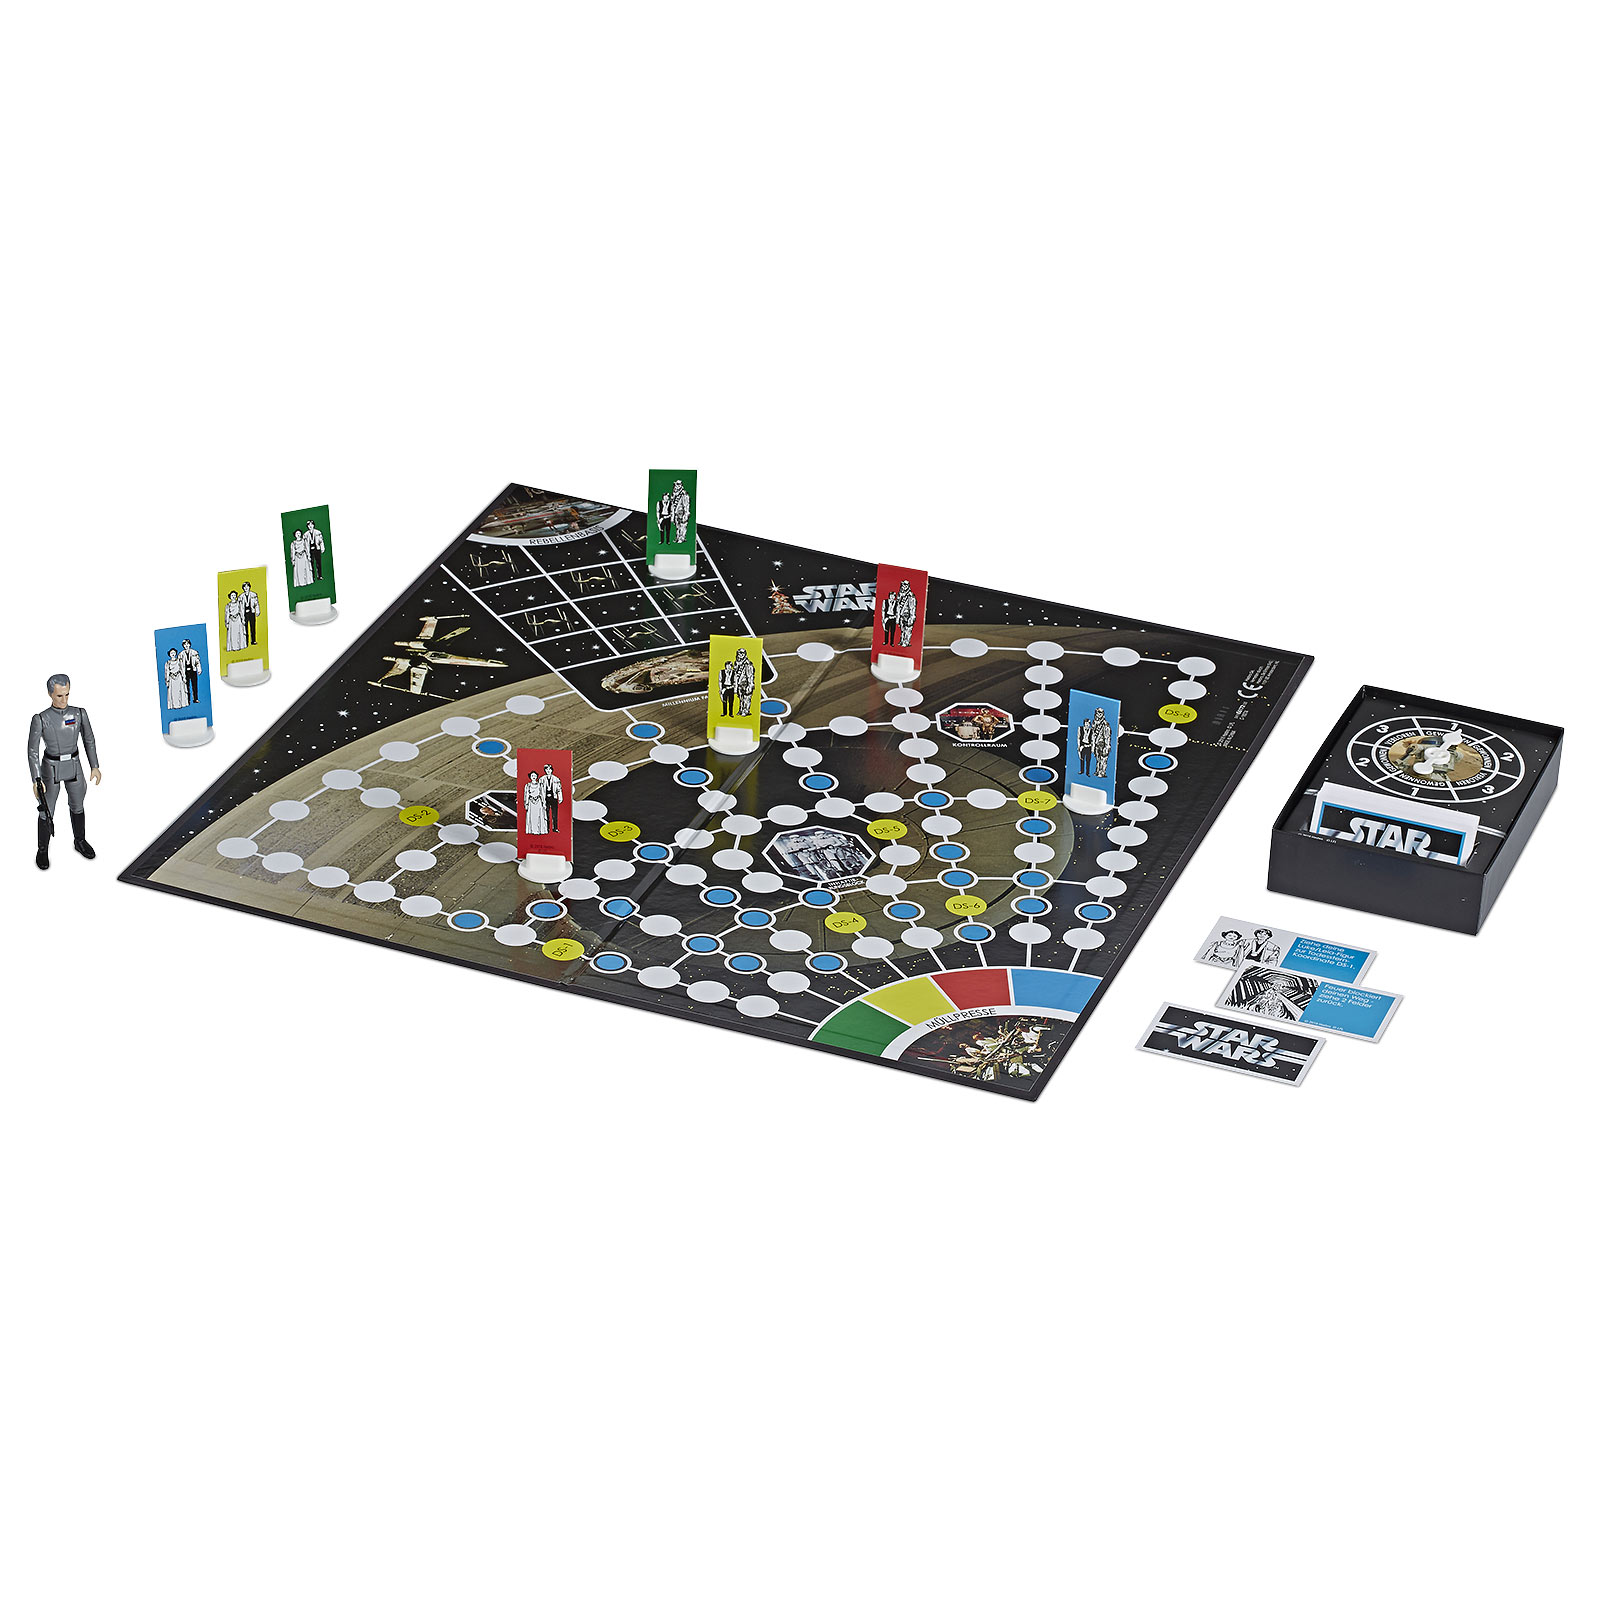 Star Wars - Escape from Death Star Board Game